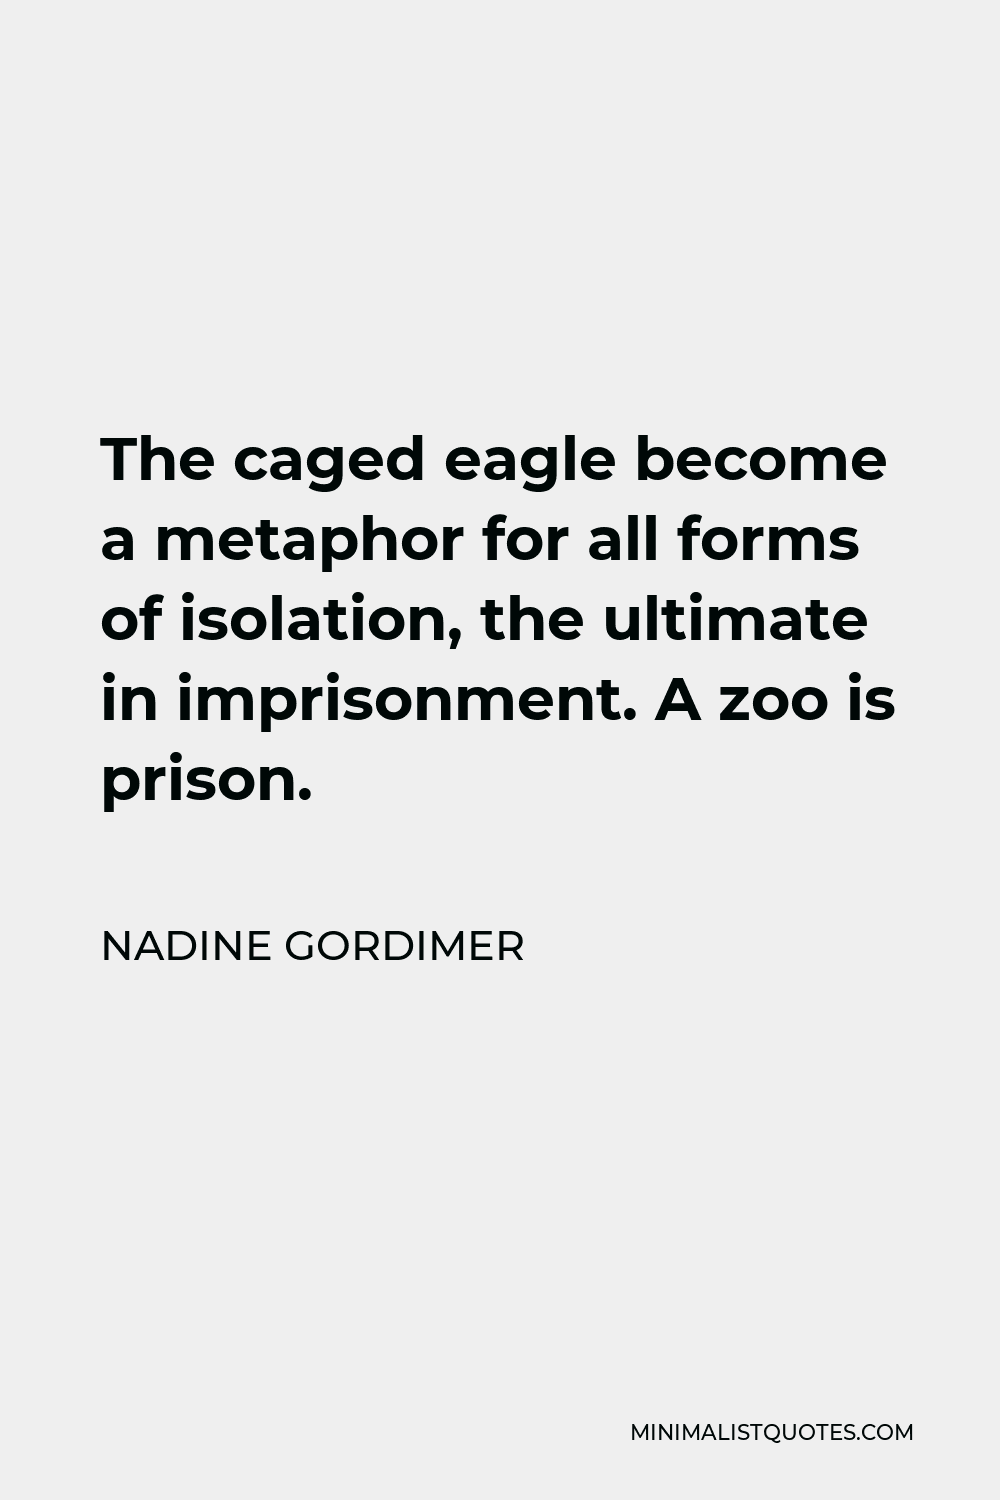 Nadine Gordimer Quote - The caged eagle become a metaphor for all forms of isolation, the ultimate in imprisonment. A zoo is prison.